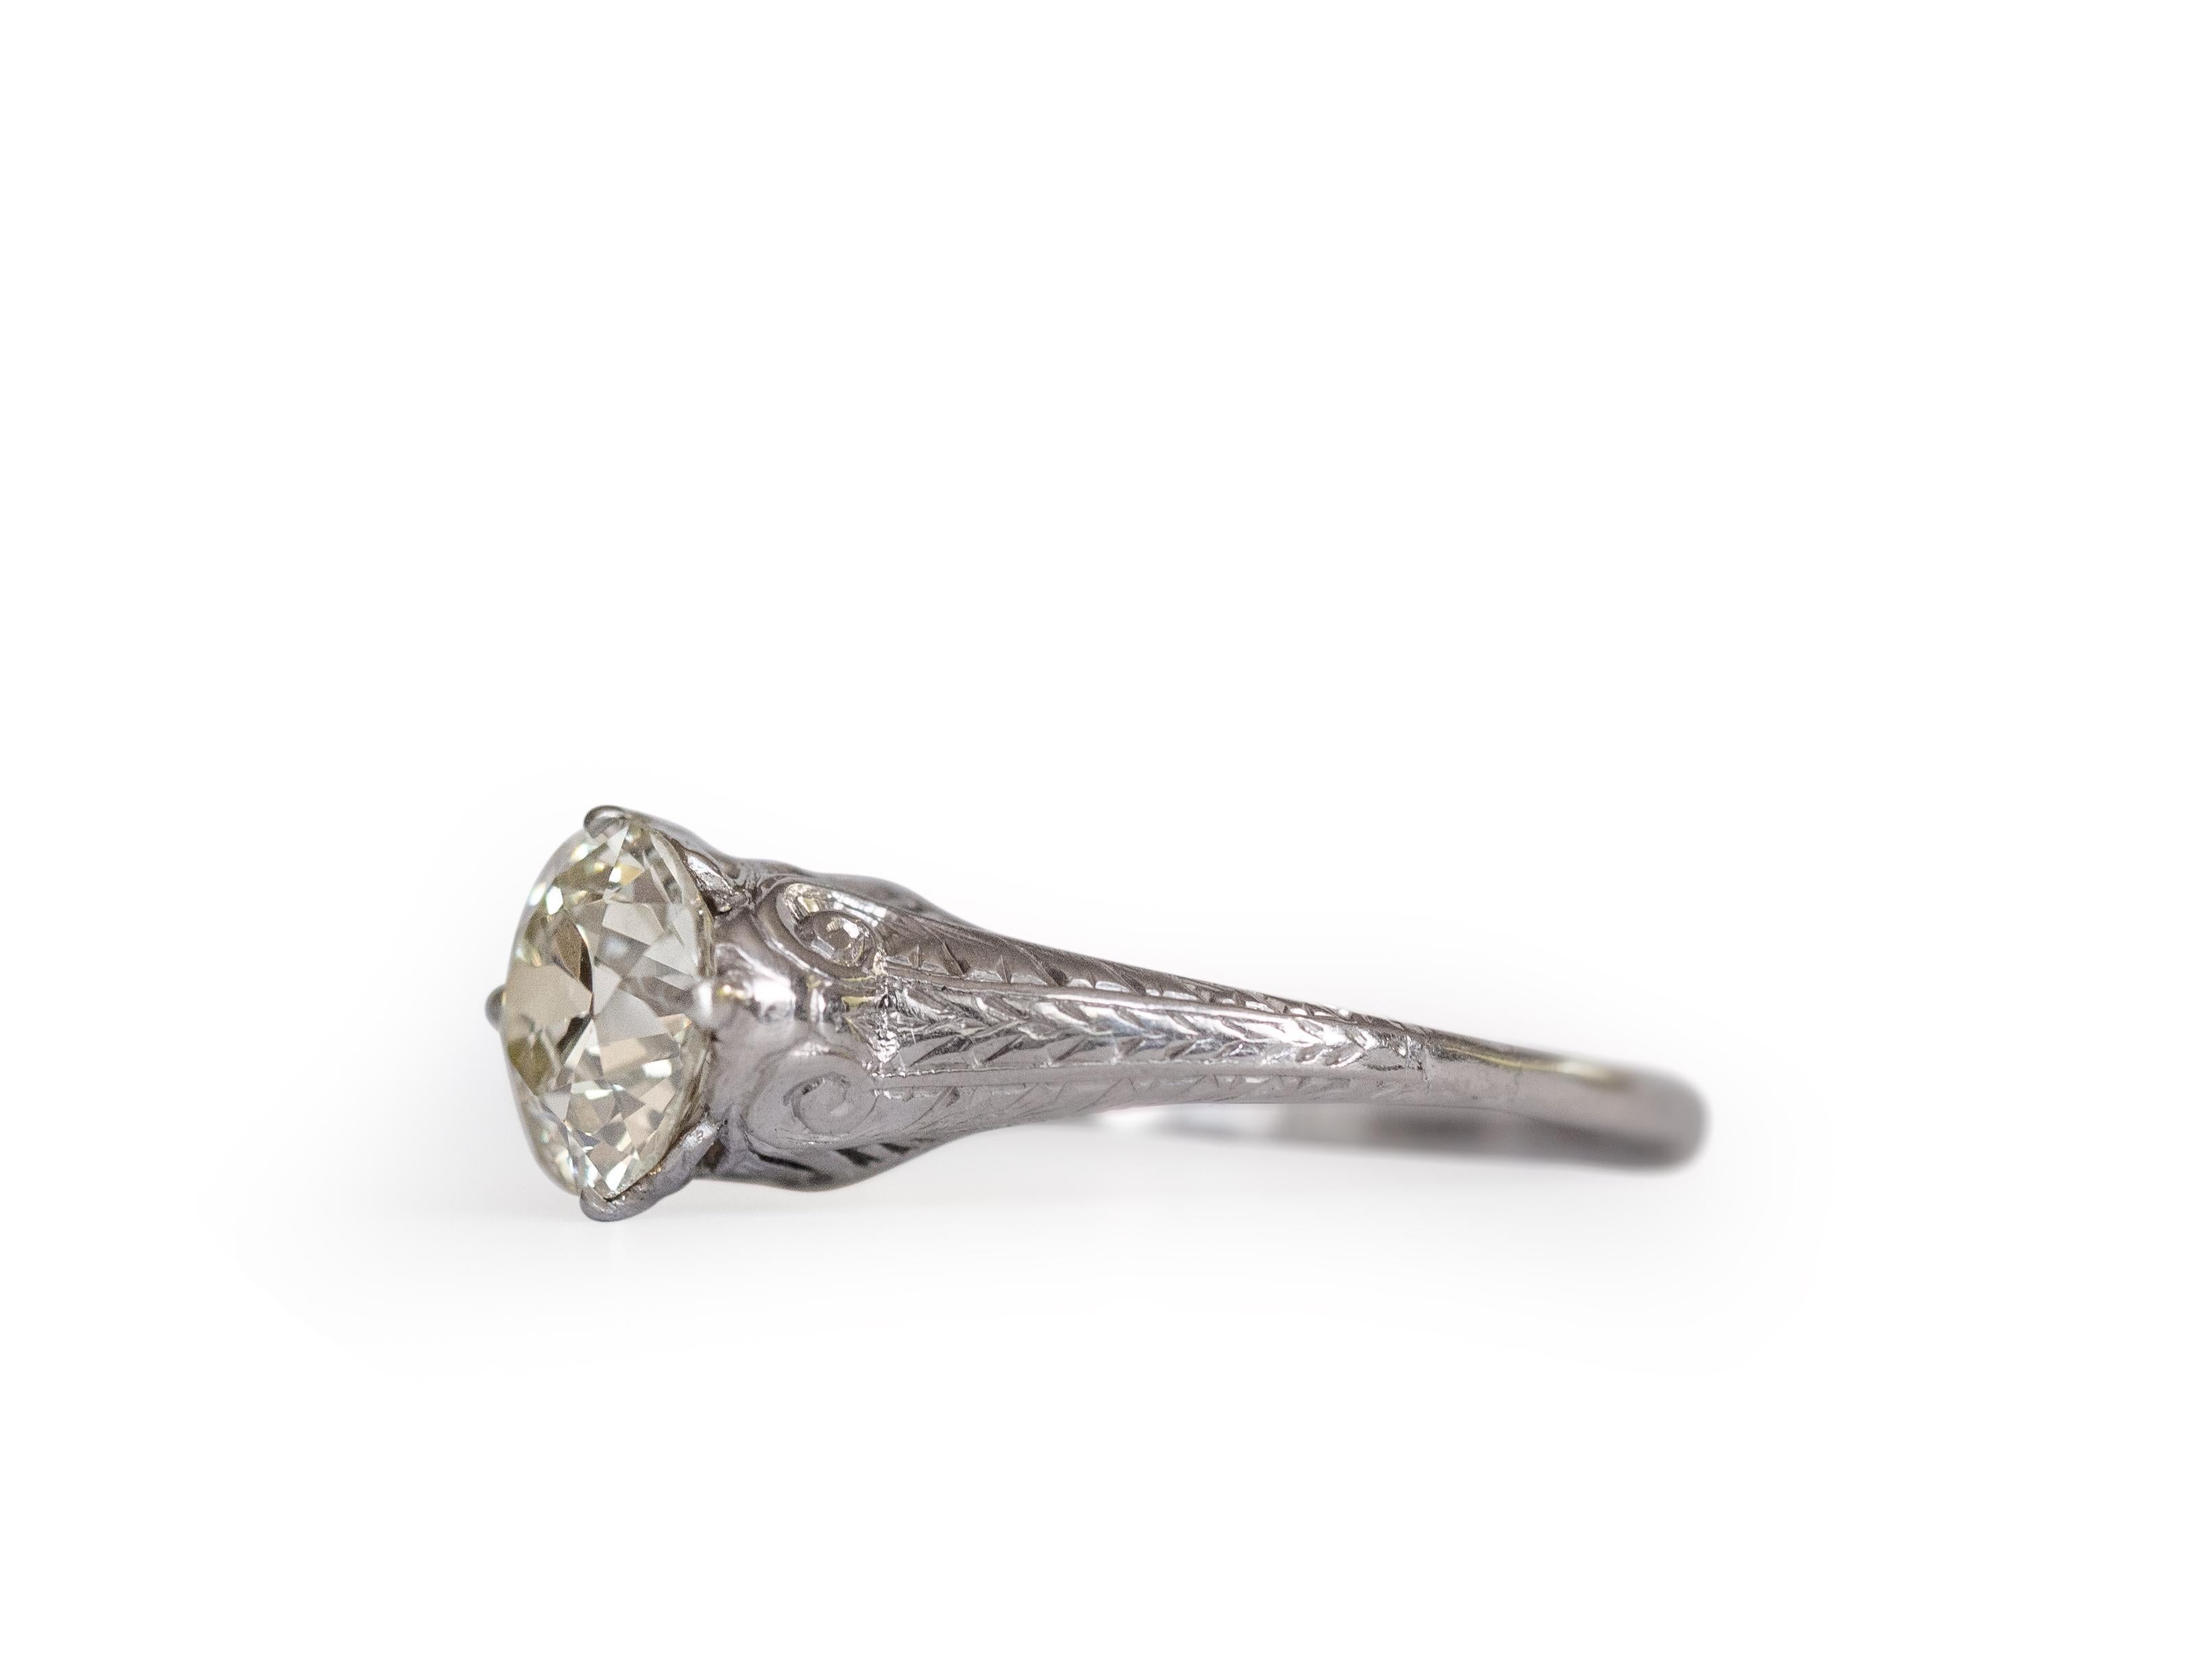 Ring Size: 7
Metal Type: Platinum [Hallmarked, and Tested]
Weight: 4 grams

Center Diamond Details:
Weight: 1.53 carat
Cut: Old European Brilliant
Color: M
Clarity: VS1

Finger to Top of Stone Measurement: 6.5mm
Condition:  Excellent